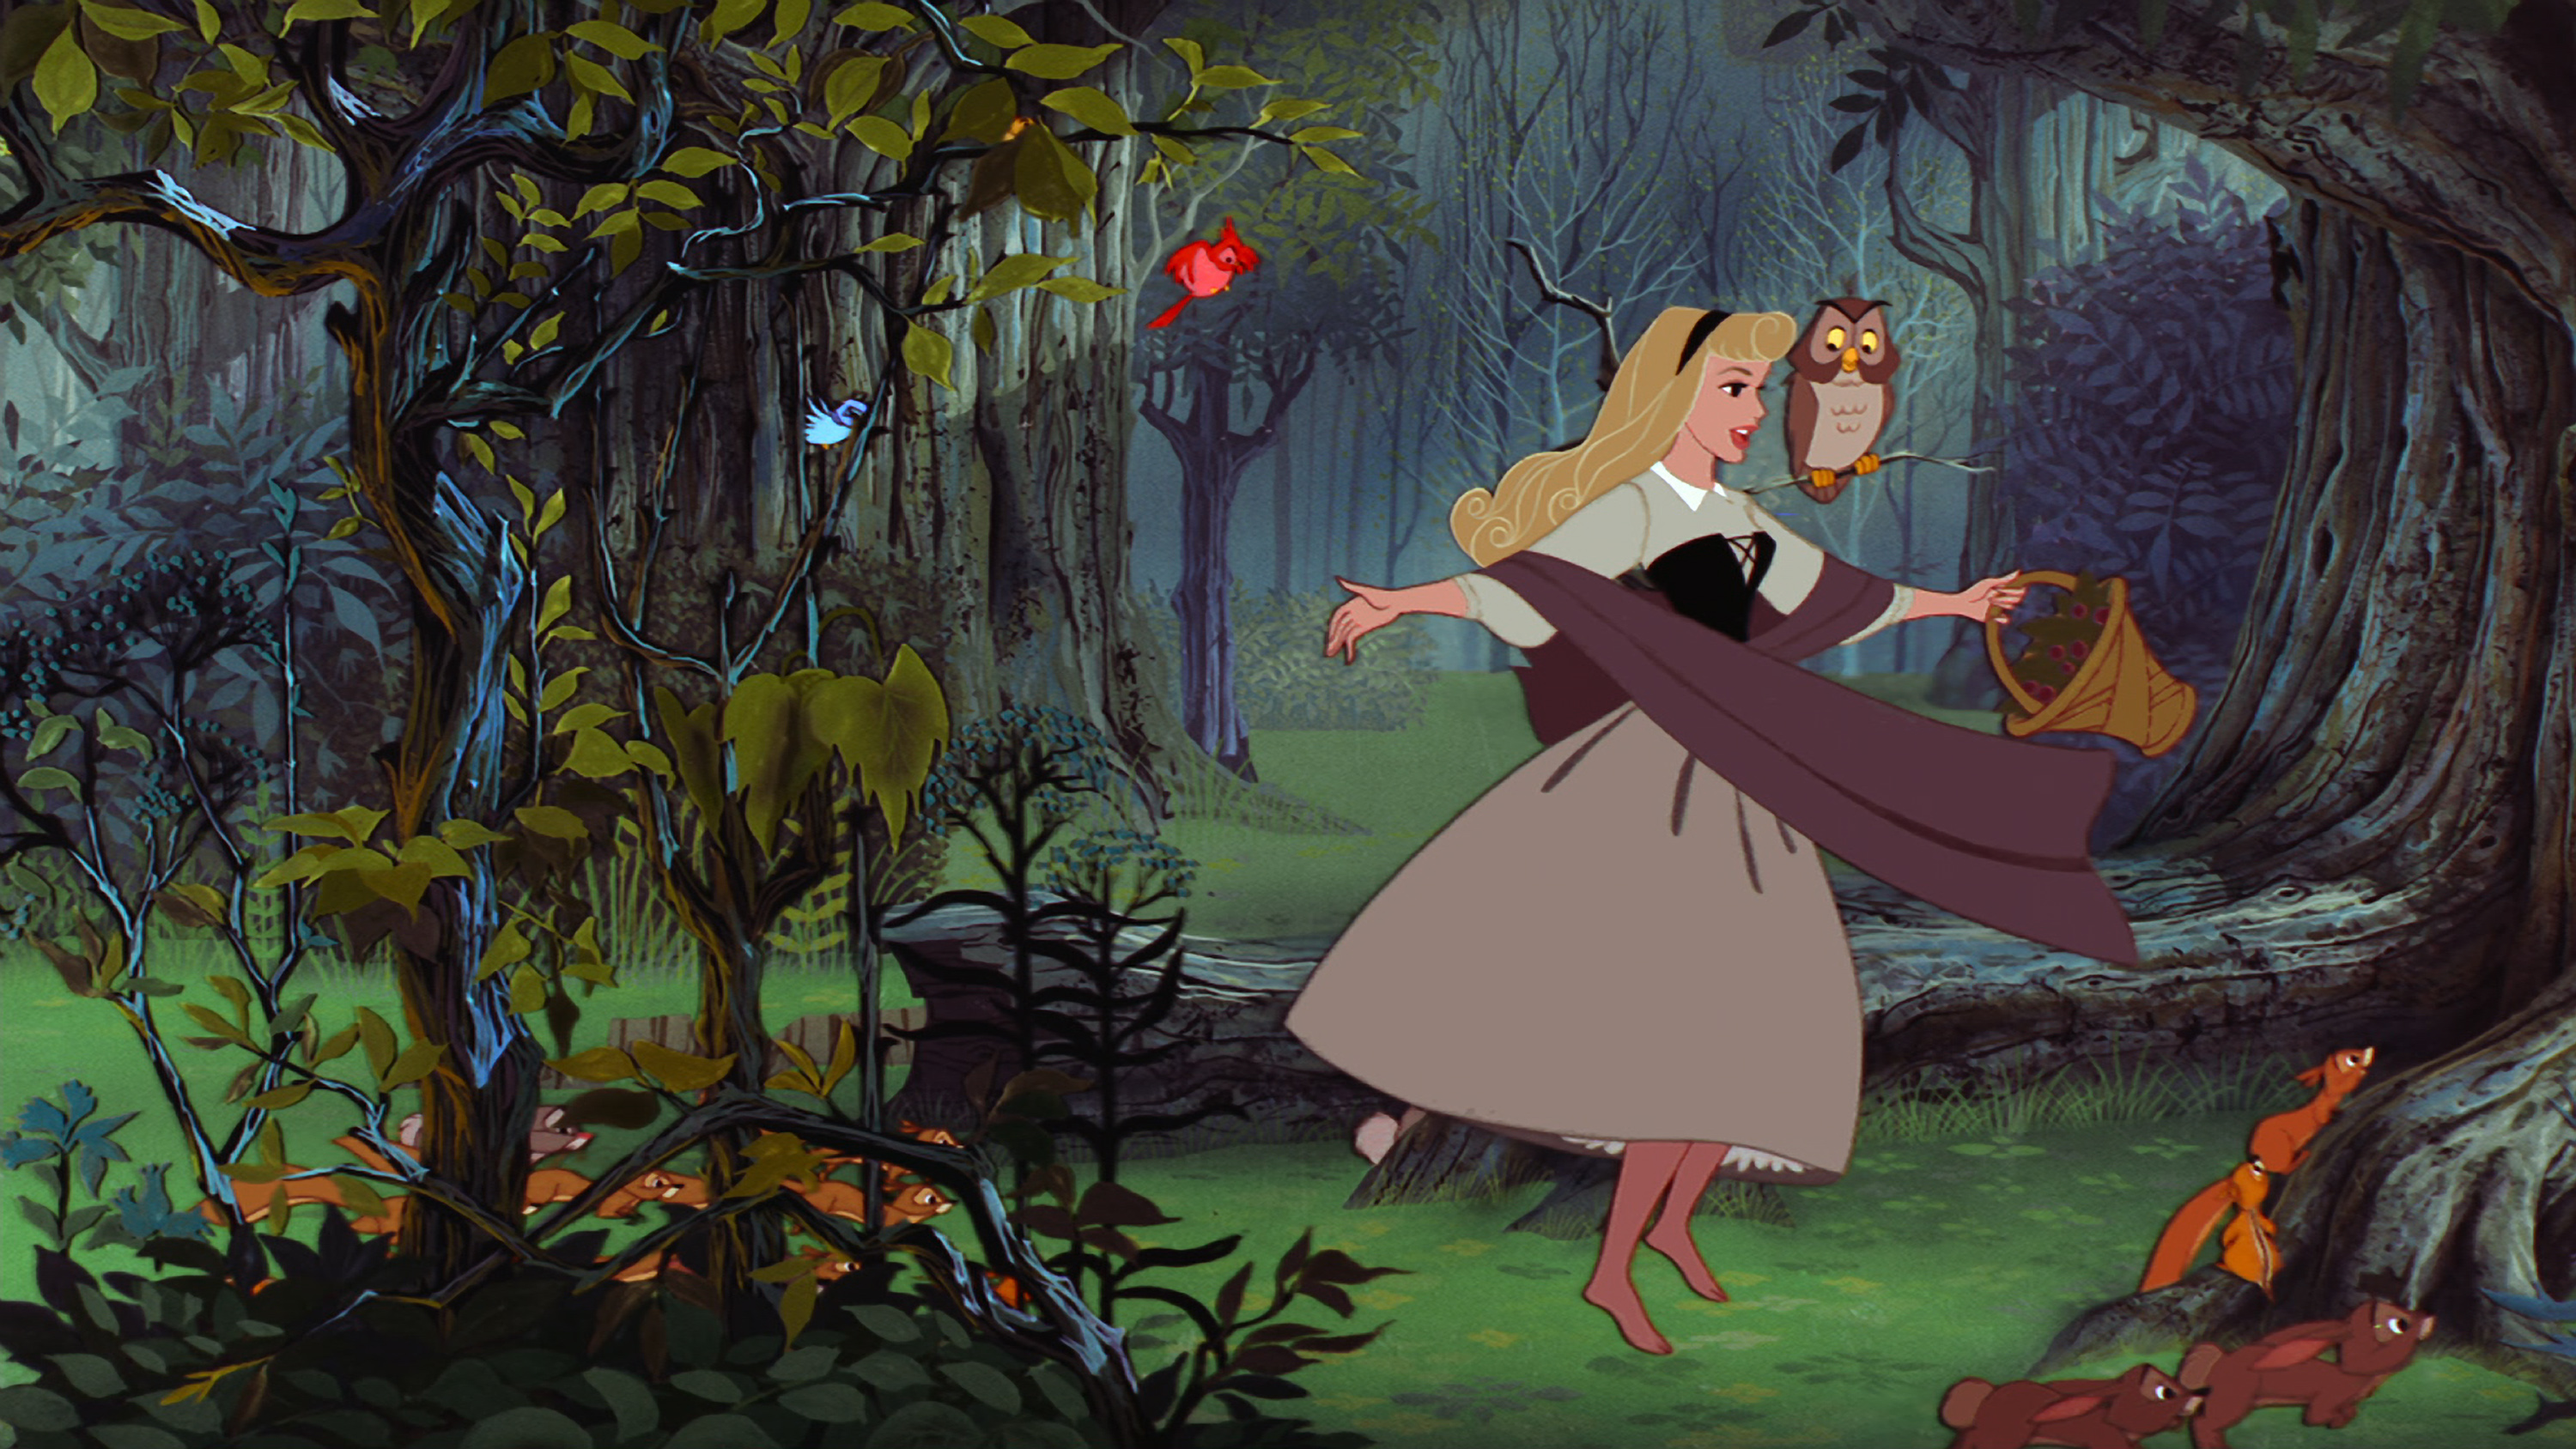 Disney: What Is Sleeping Beauty's Actual Name?